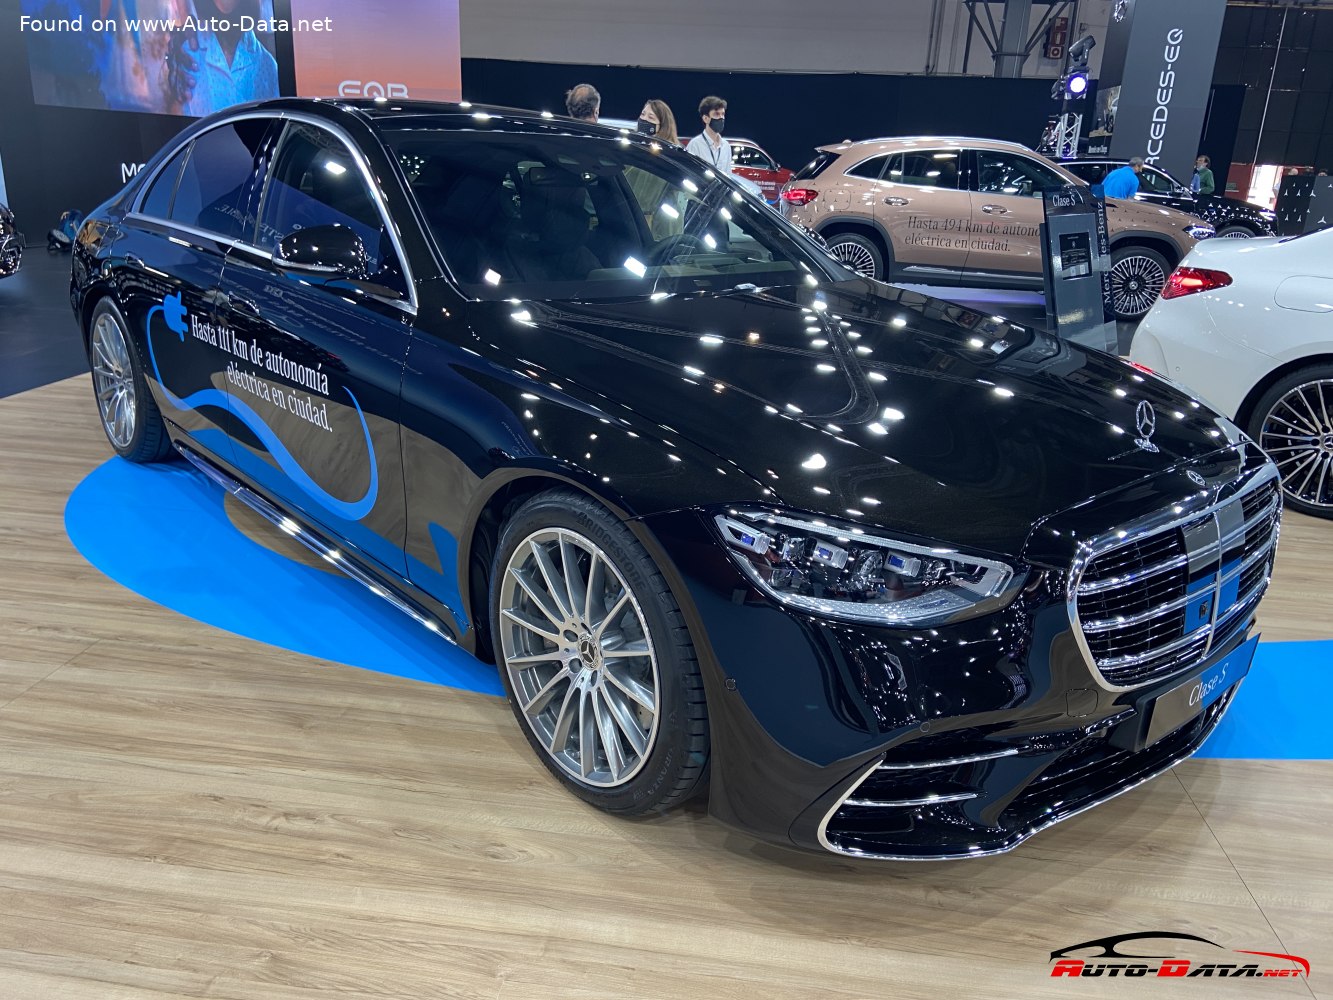 equation At first focus 2021 Mercedes-Benz S-class (W223) S 580e (510 Hp) 9G-TRONIC | Technical  specs, data, fuel consumption, Dimensions